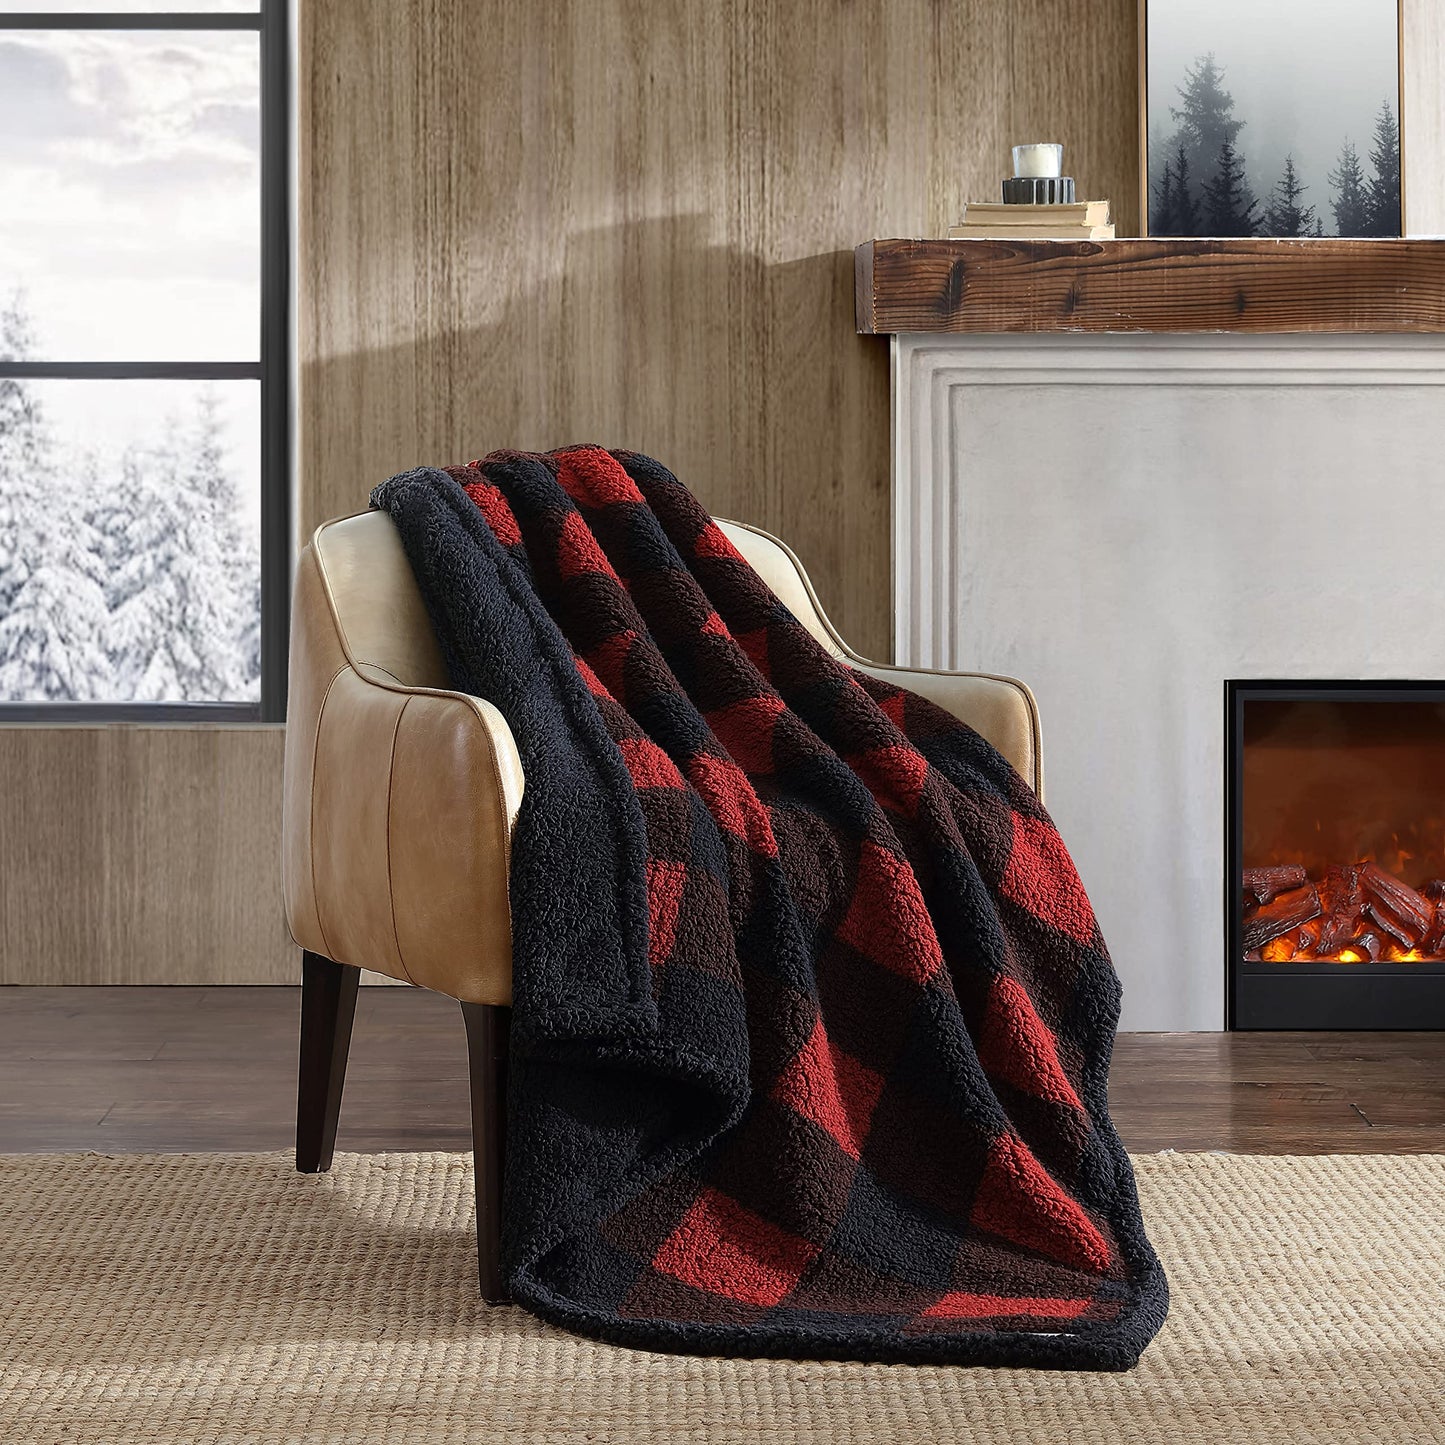 Eddie Bauer - Throw Blanket Reversible  Home Decor for All Seasons (Red/Black)